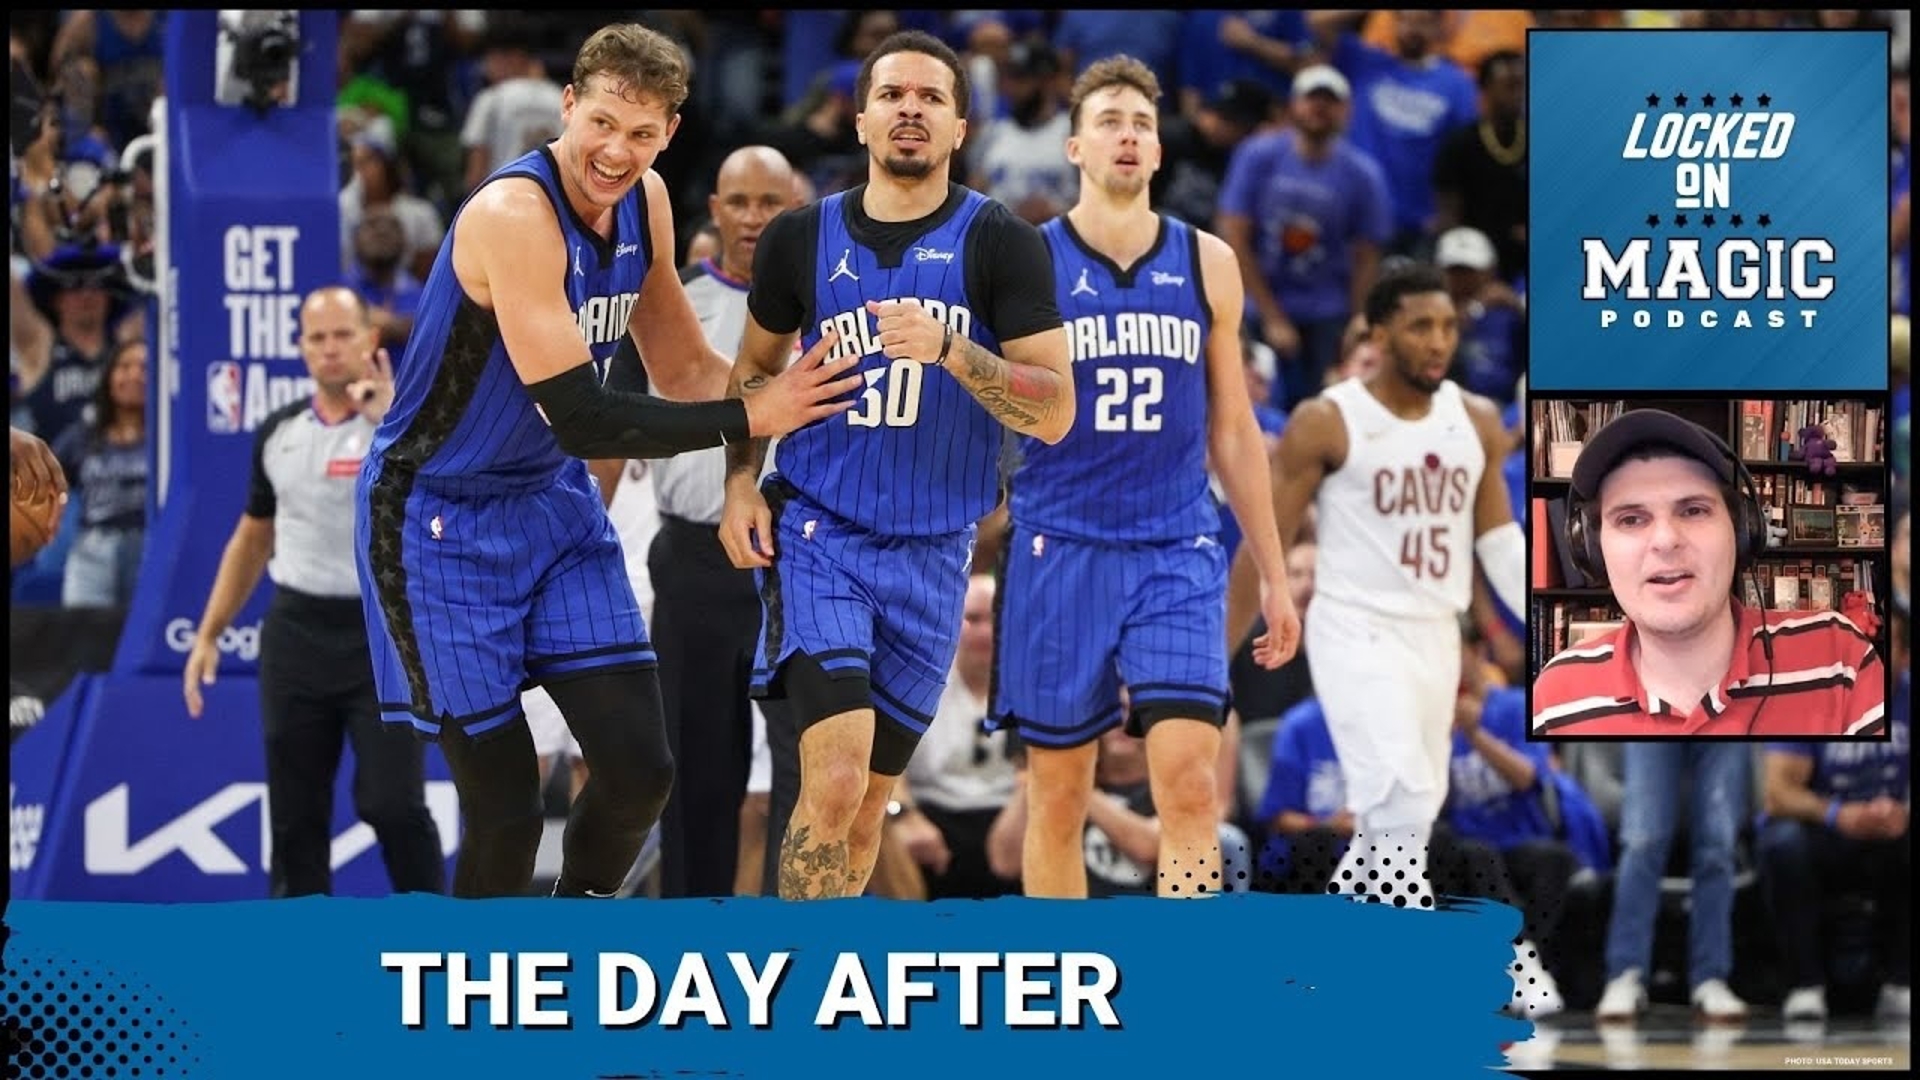 The Orlando Magic packed up the AdventHealth Training Center and parted ways for the offseason.